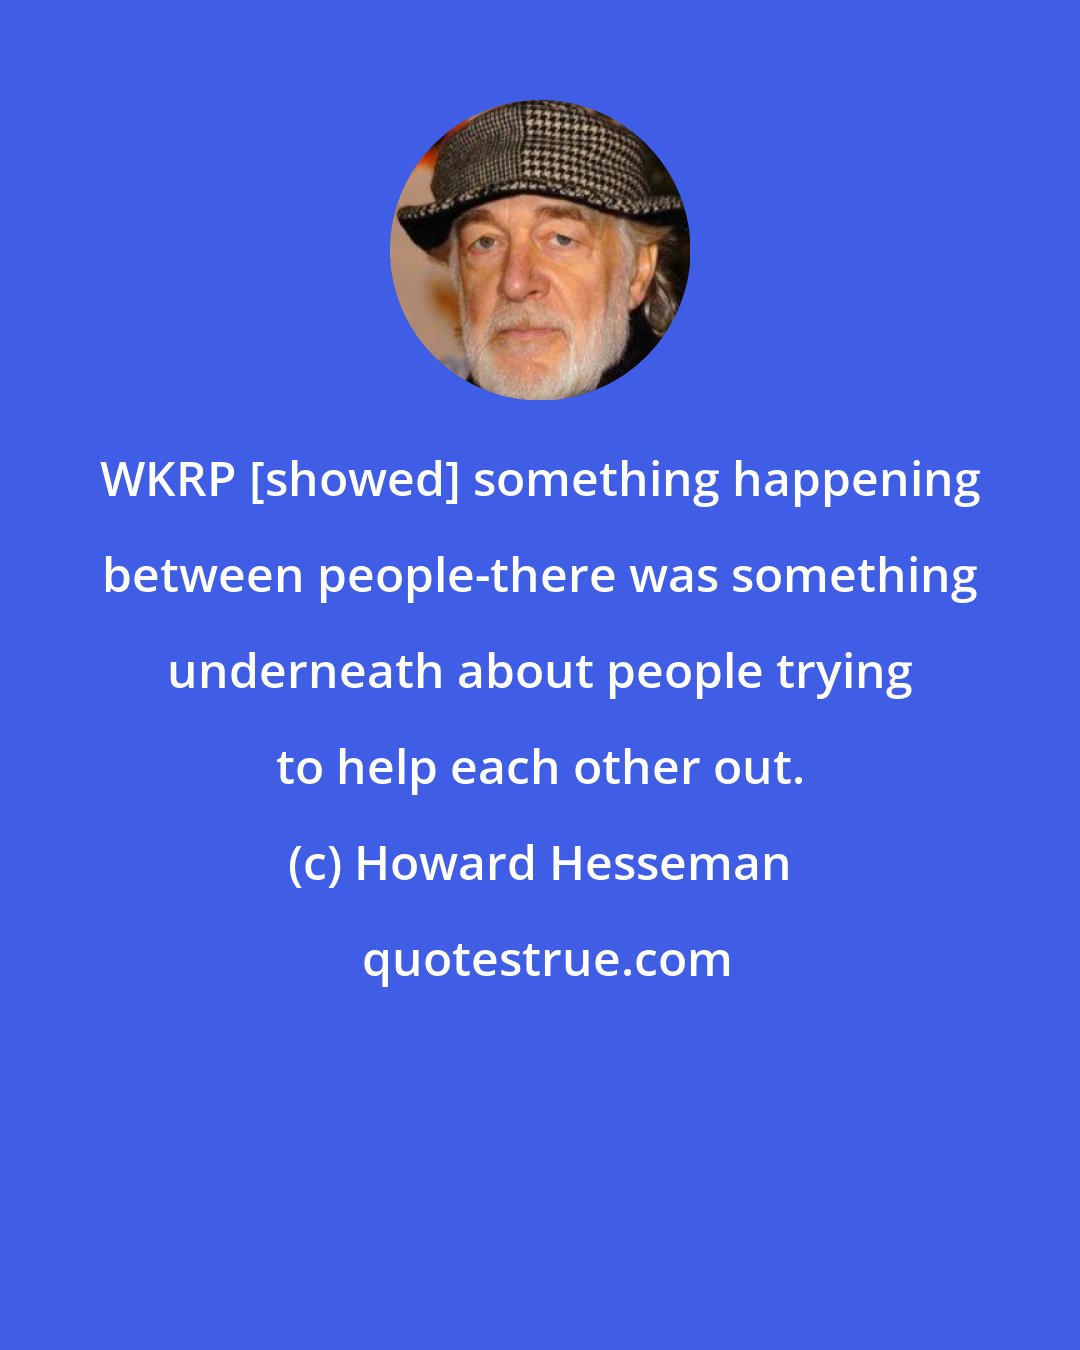 Howard Hesseman: WKRP [showed] something happening between people-there was something underneath about people trying to help each other out.